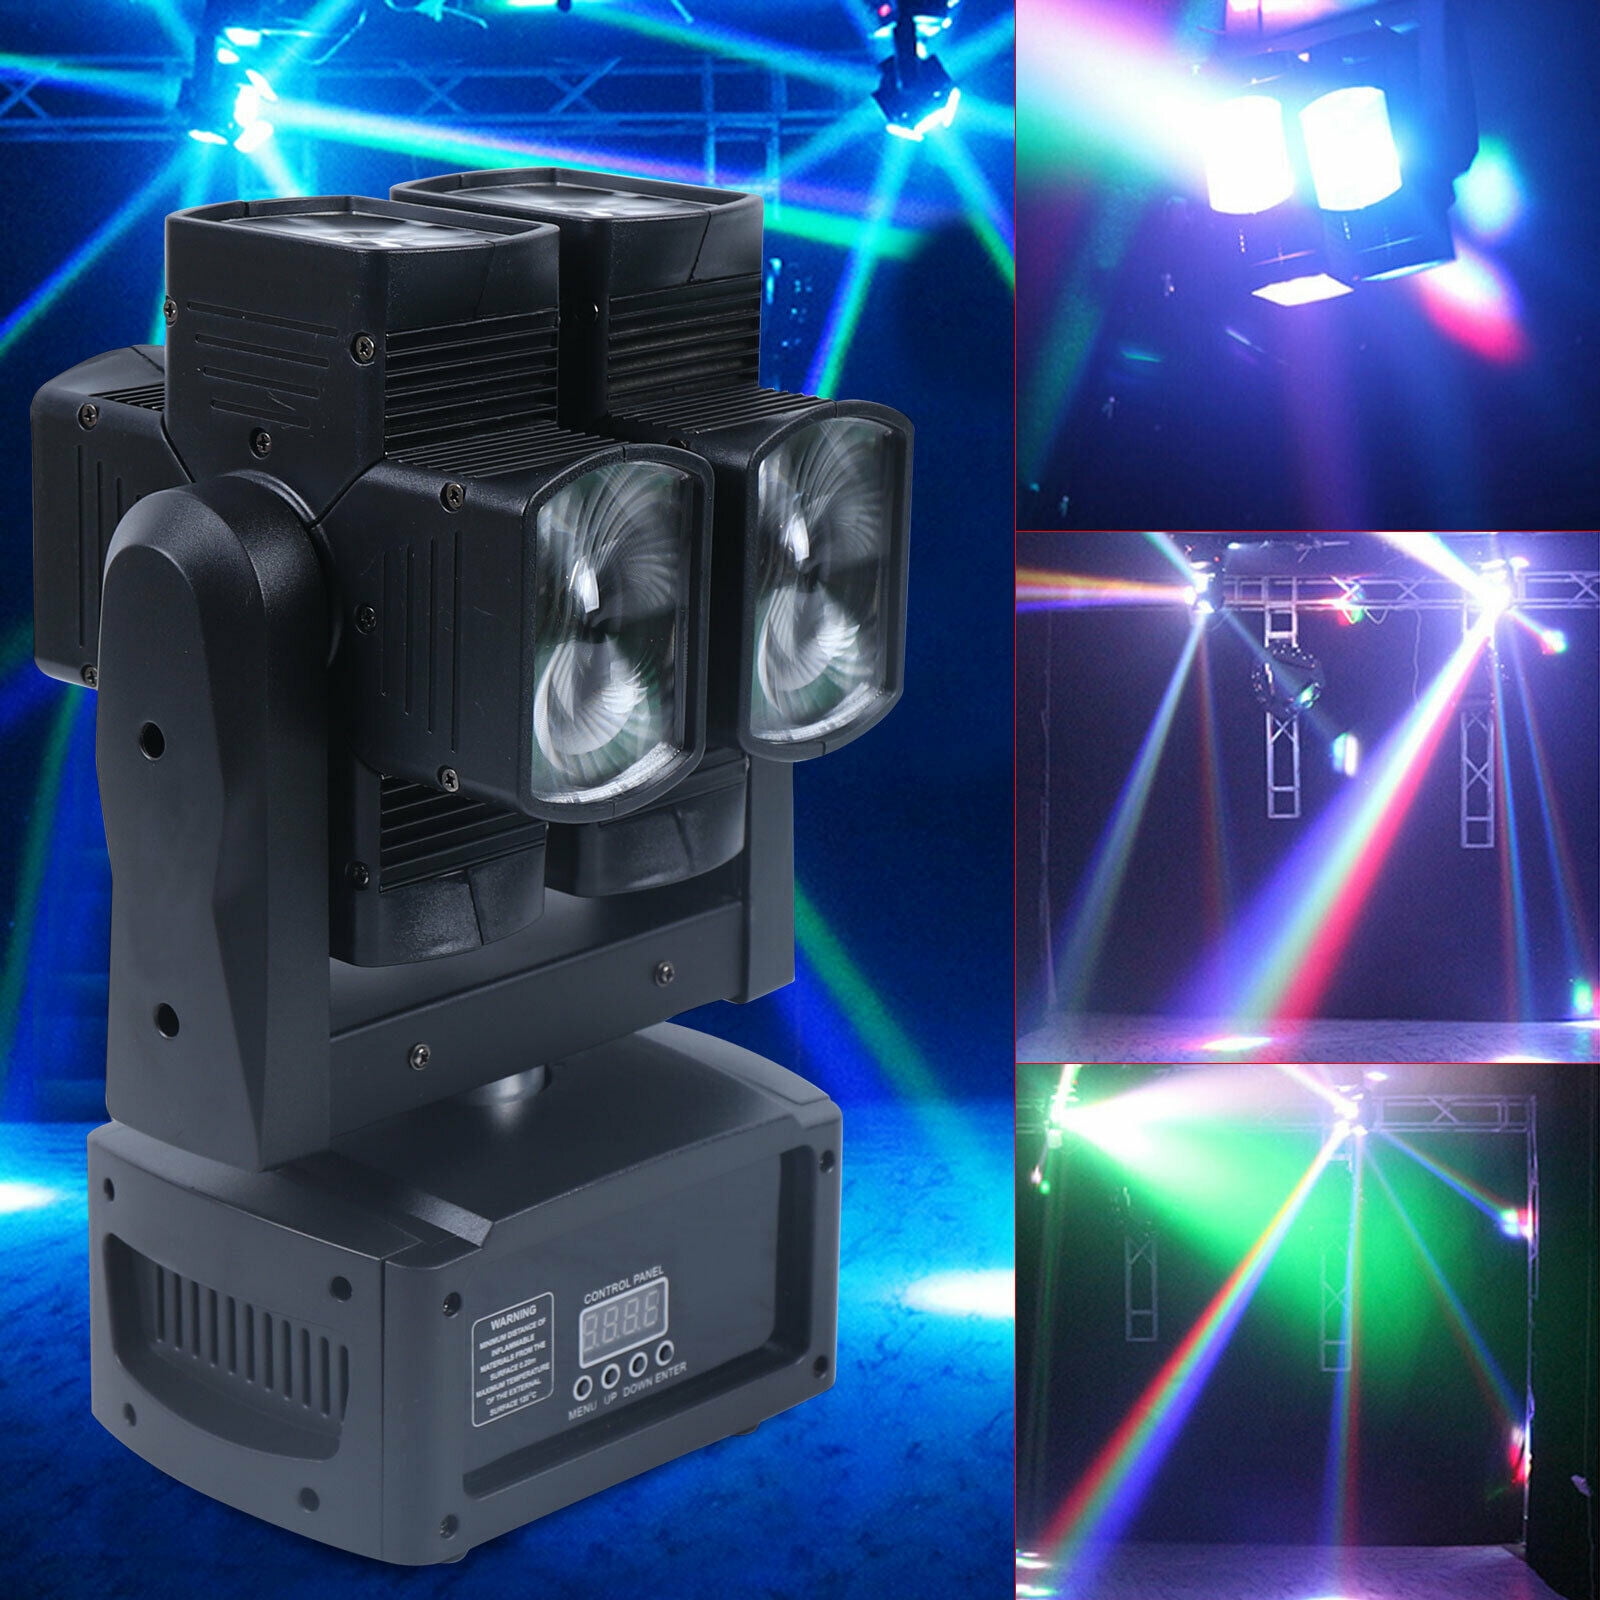 3 In 1 RGB 16LED  Projector Stage Light DMX Mixing Wedding DJ Disco Party Lamp 